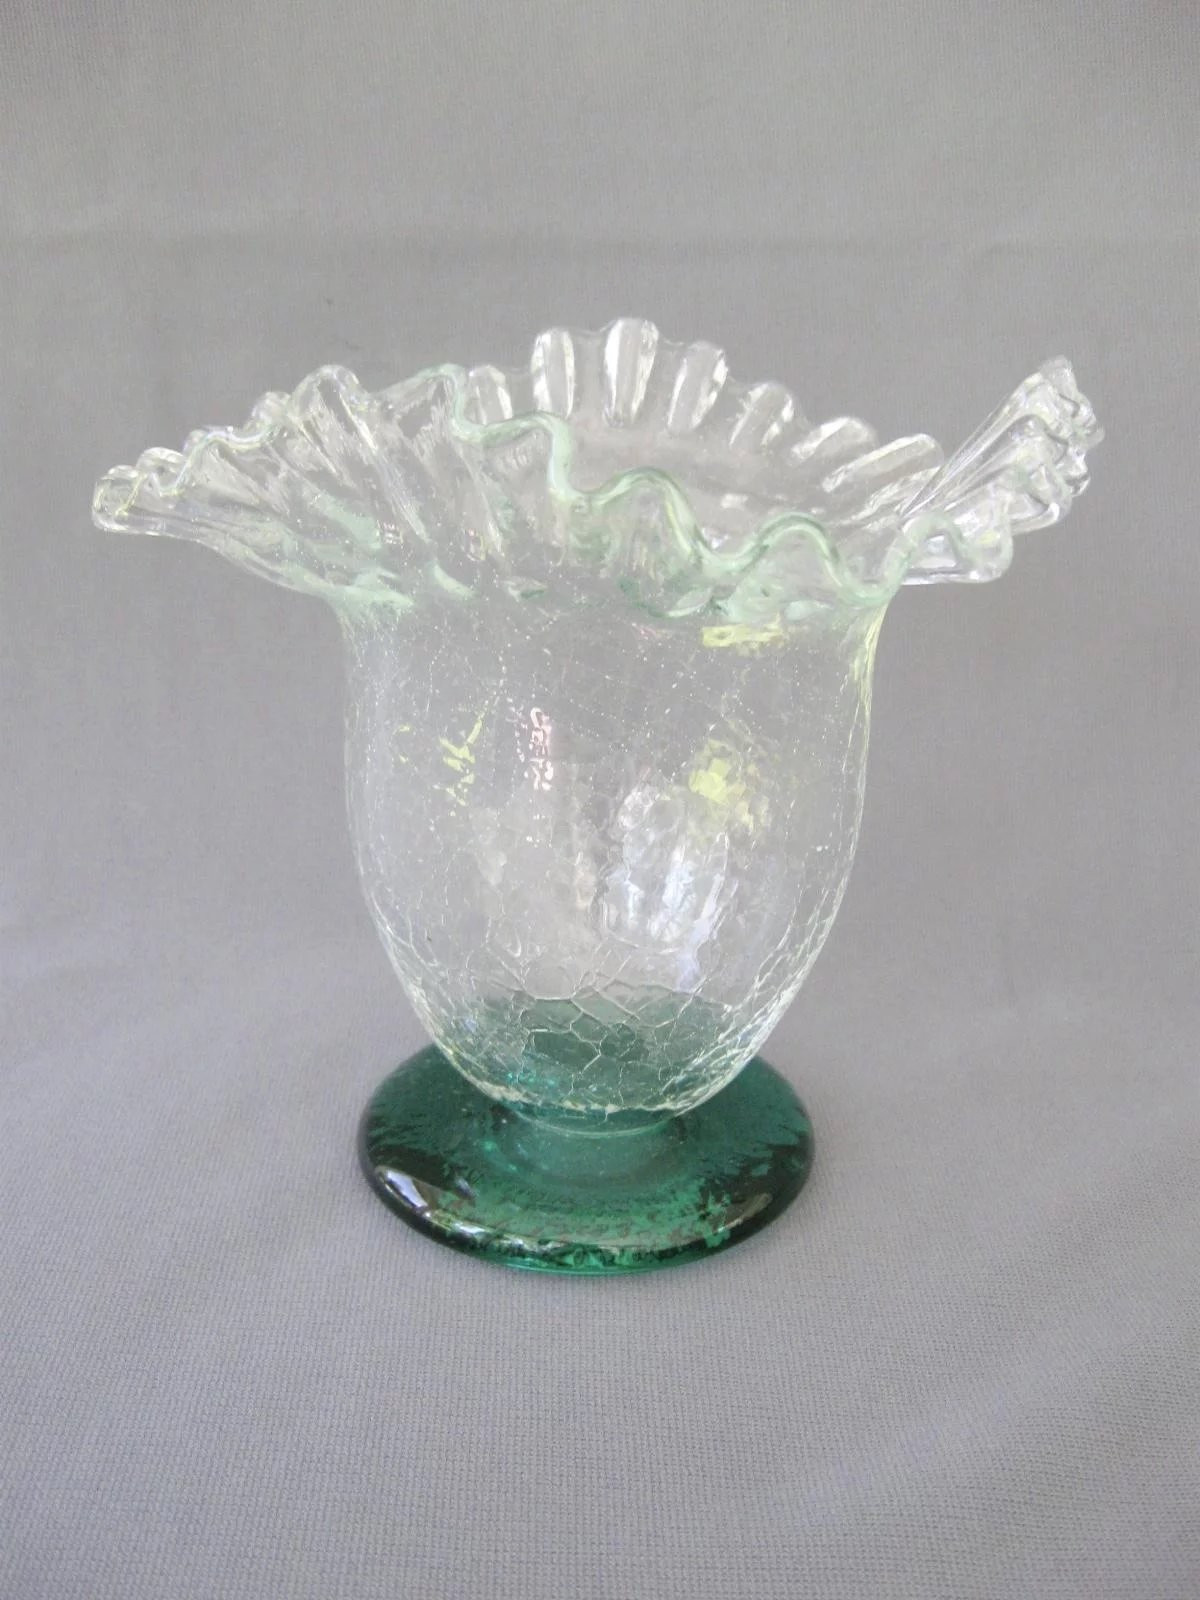 13 Perfect Hoosier Glass Vase 4063 B 2024 free download hoosier glass vase 4063 b of 3 foot glass vase vase and cellar image avorcor com throughout 3 foot gl vase and cellar image avorcor